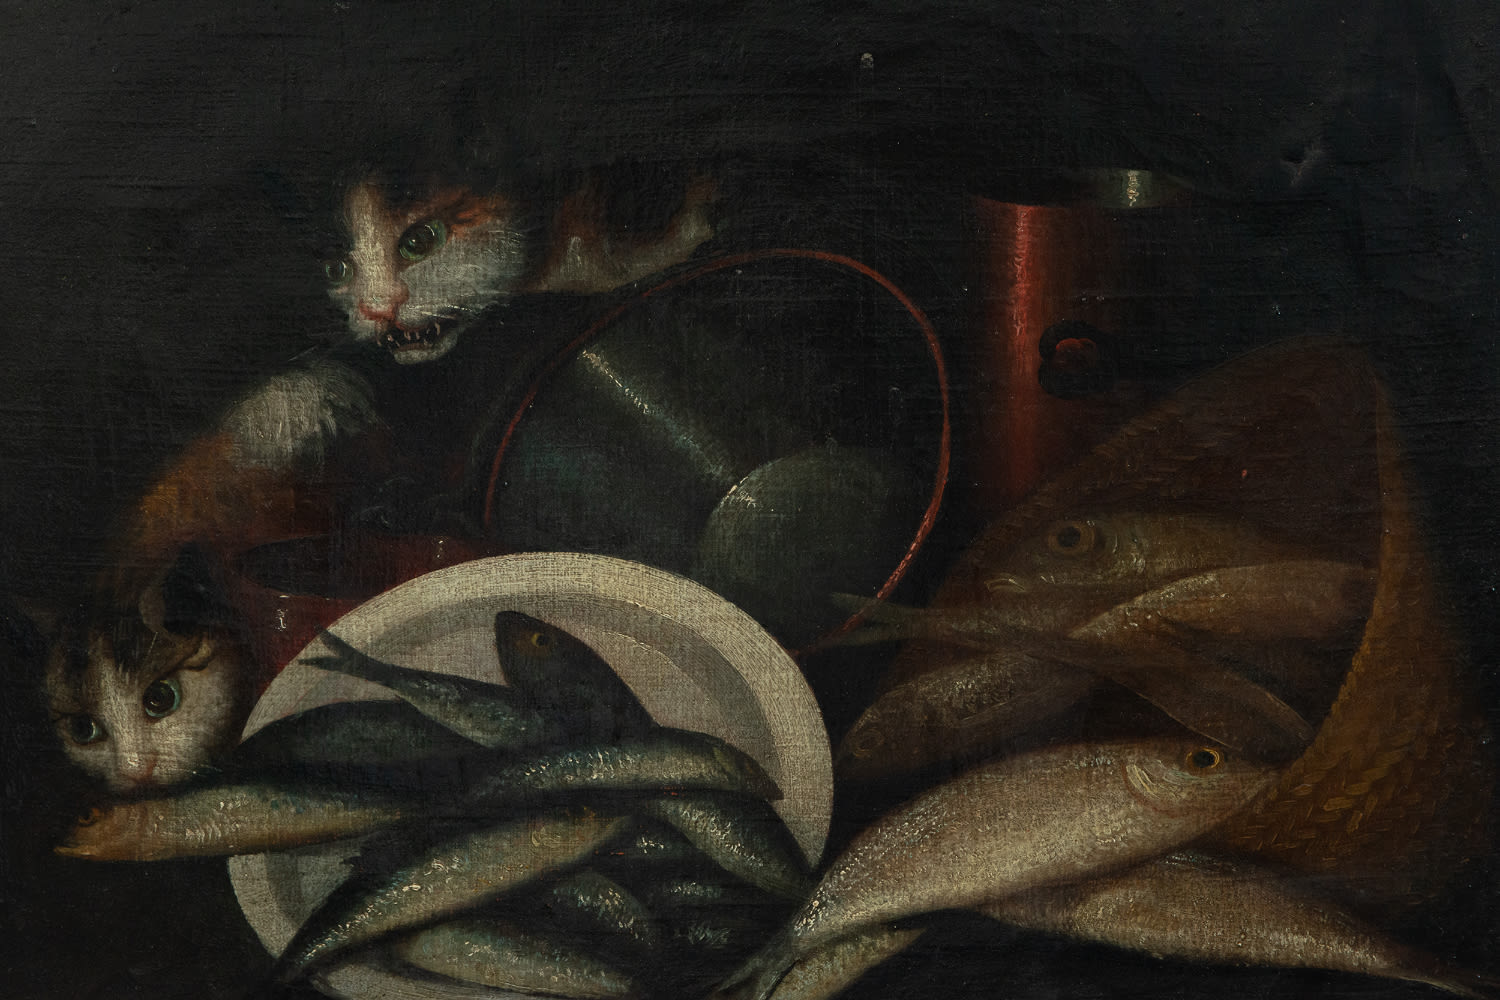 Pair of Still Lifes of Cat with Fish and Fruit, Italian school of the 18th - 19th century - Image 3 of 8